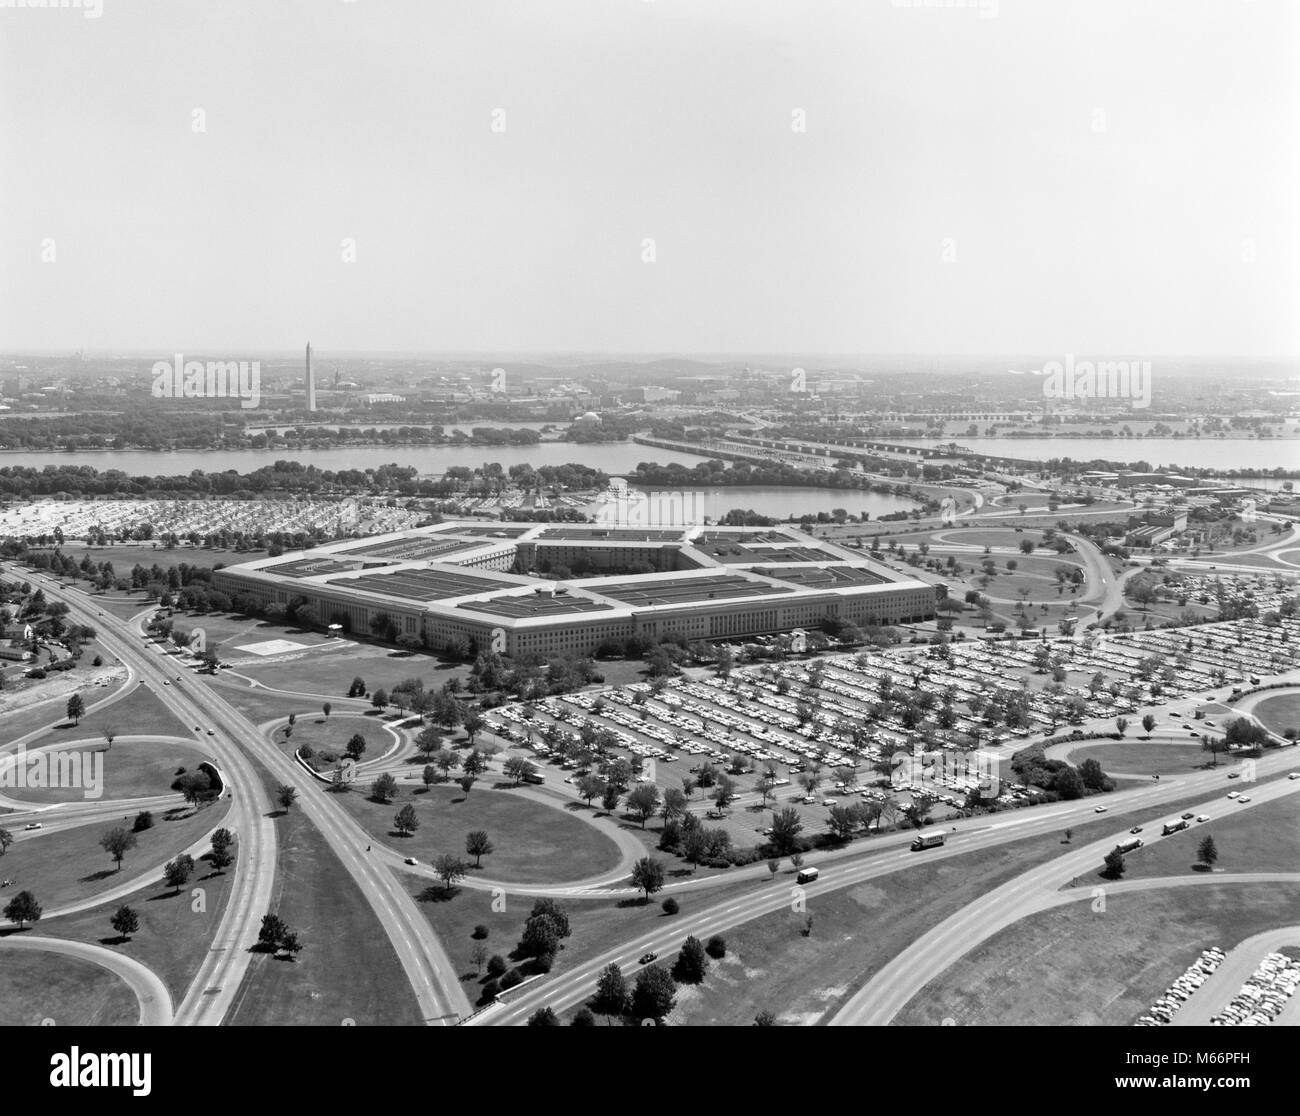 1960s AERIAL VIEW OF THE PENTAGON RIVER CLOVERLEAF TRAFFIC PATTERN ARLINGTON BRIDGE 5 SIDES ARCHITECTURE - r19244 BAU001 HARS WIDE ANGLE CAPITOL PROTECTION STRENGTH VICTORY STRATEGY COURAGE EXTERIOR NOBODY WORLD WARS TRAVEL USA PRIDE WORLD WAR WORLD WAR TWO WORLD WAR II AUTHORITY POLITICS CAPITAL HIGH TECH WORLD WAR 2 HEADQUARTERS POTOMAC SIDES TERRORIST VA 1941 2001 AERIAL VIEW ARLINGTON ARLINGTON COUNTY B&W BLACK AND WHITE CAPITAL CITY CLOVERLEAF DEPARTMENT OF DEFENSE OCCUPATIONS OLD FASHIONED PENTAGON SEPTEMBER 11 SEPTEMBER 11 2001 TERRORIST ATTACK TERRORIST ATTACKS WASHINGTON MONUMENT Stock Photo